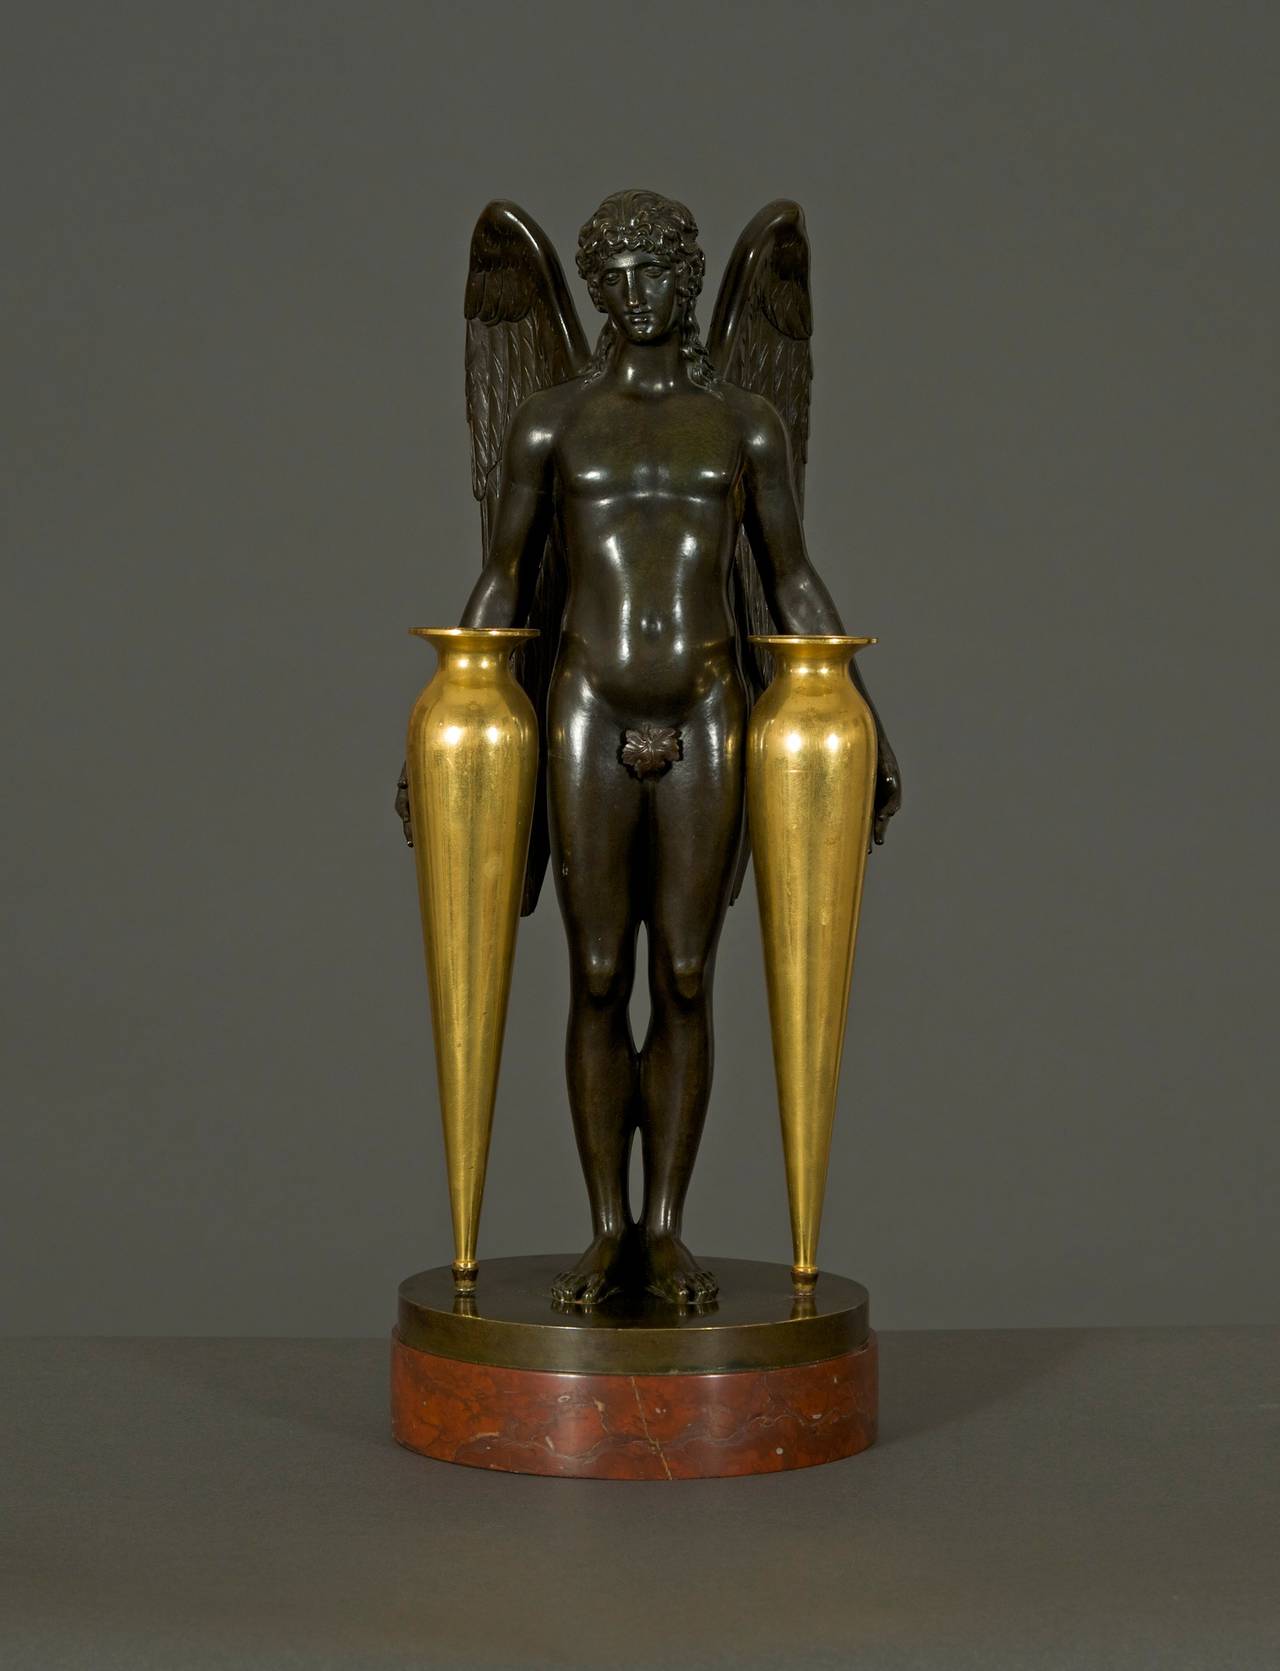 Of winged male form holding two elongated gilt-bronze handleless amphorae raised on a circular base of Rouge Griotte. Detailed research report available on request.